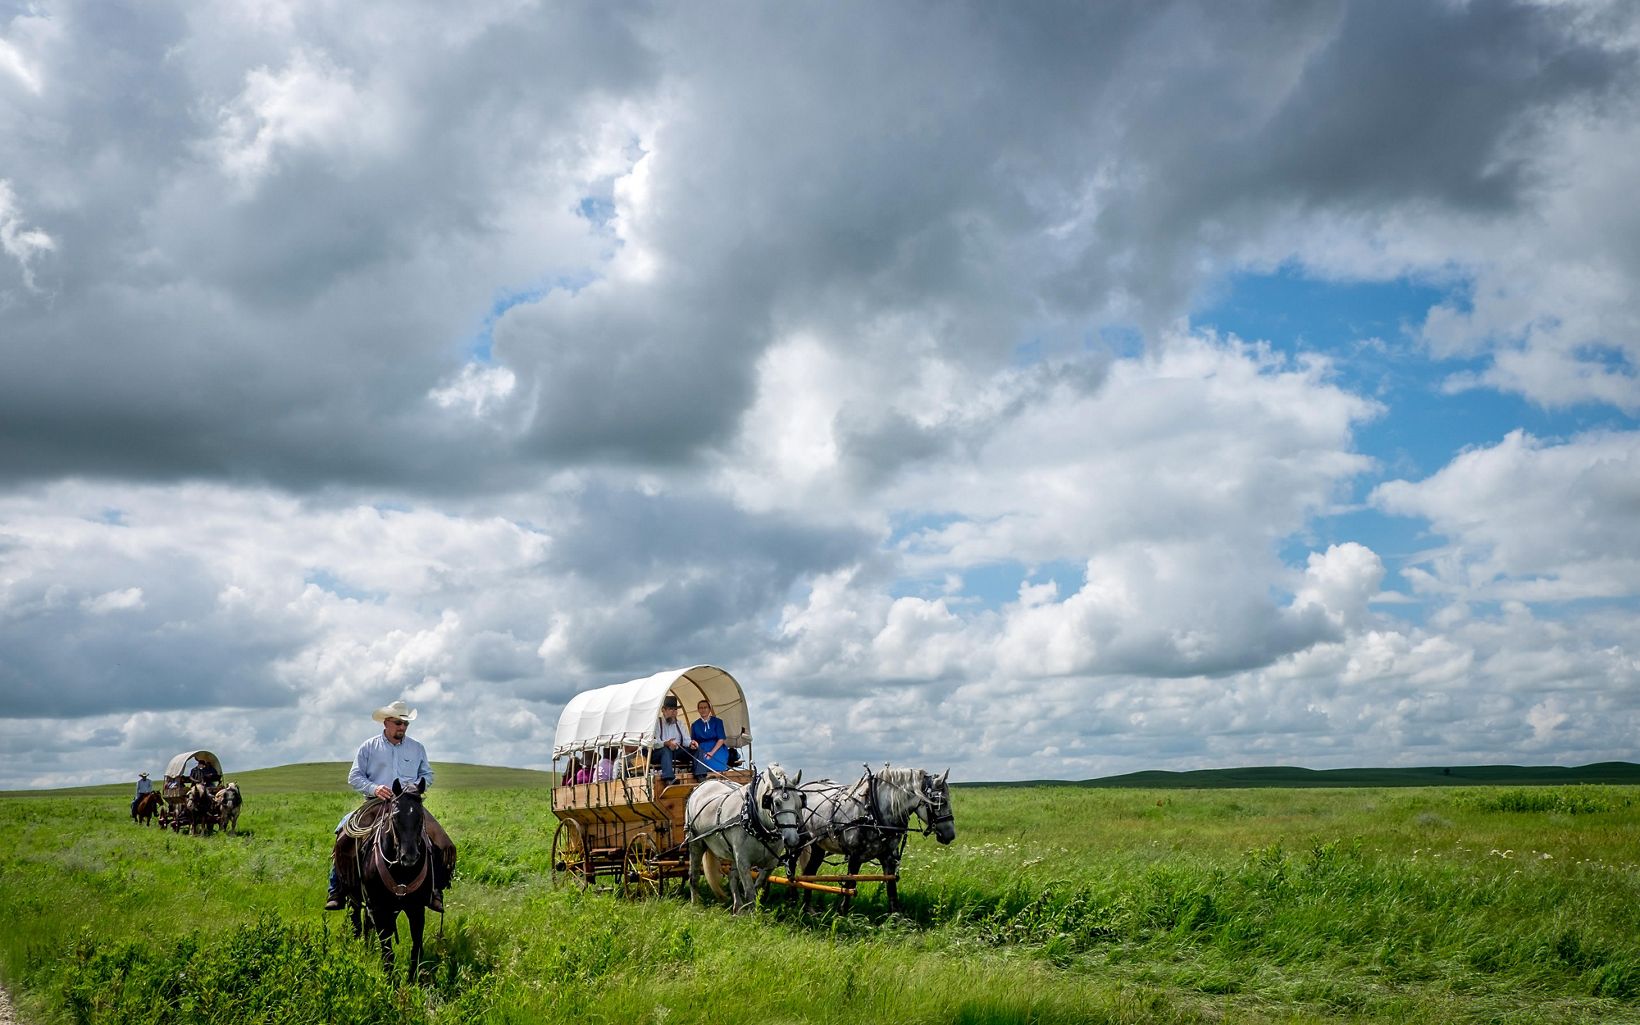 Symphony in the Flint Hills Guests make a day of visiting the prairie. It starts with a wagon ride or hike from the parking lot, followed by art exhibits, music, natural-history talks, and hiking. © Tom Parker